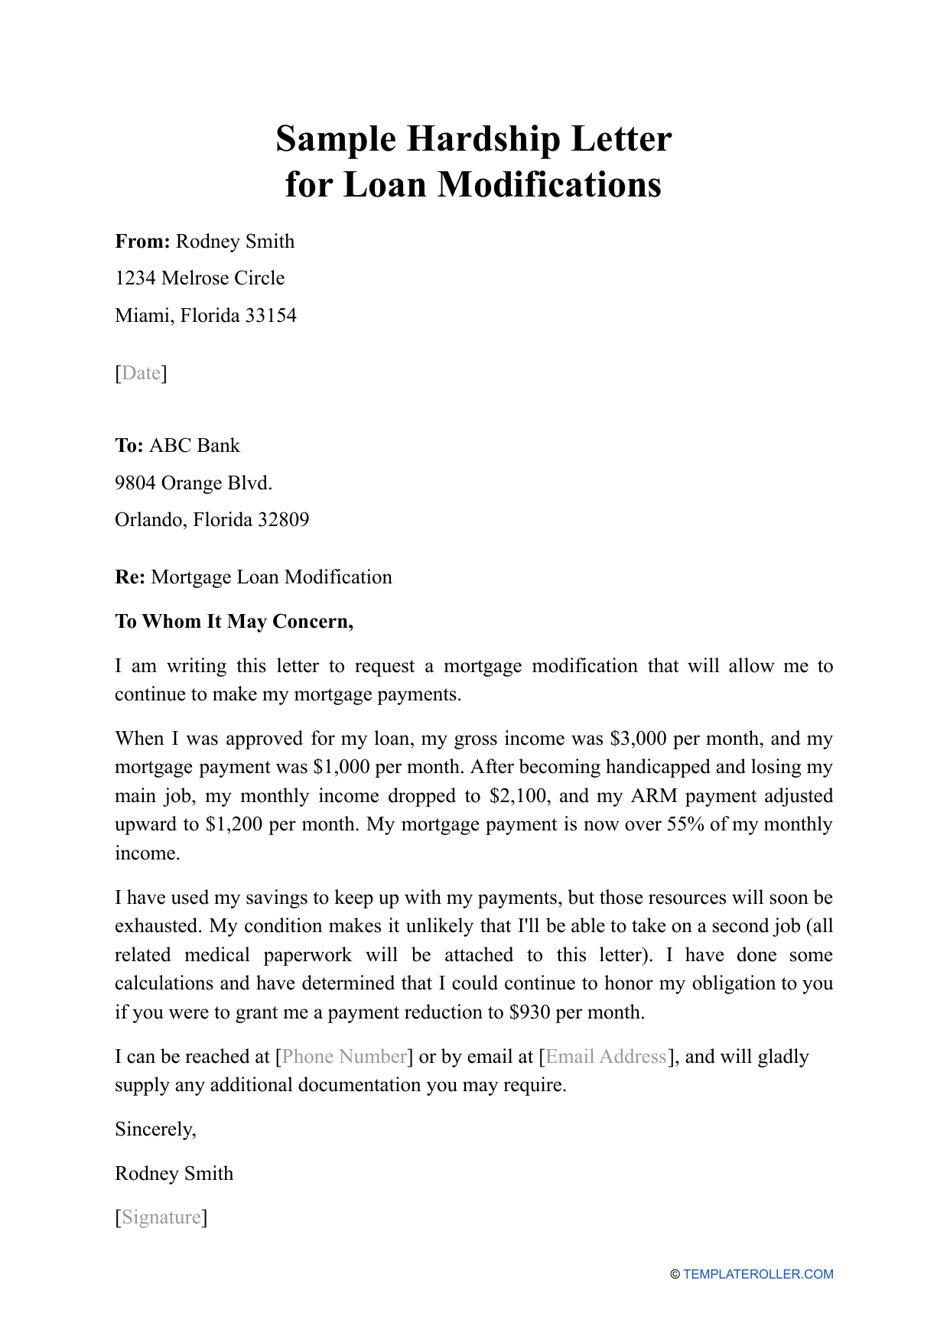 Sample Hardship Letter for Loan Modifications, Page 1